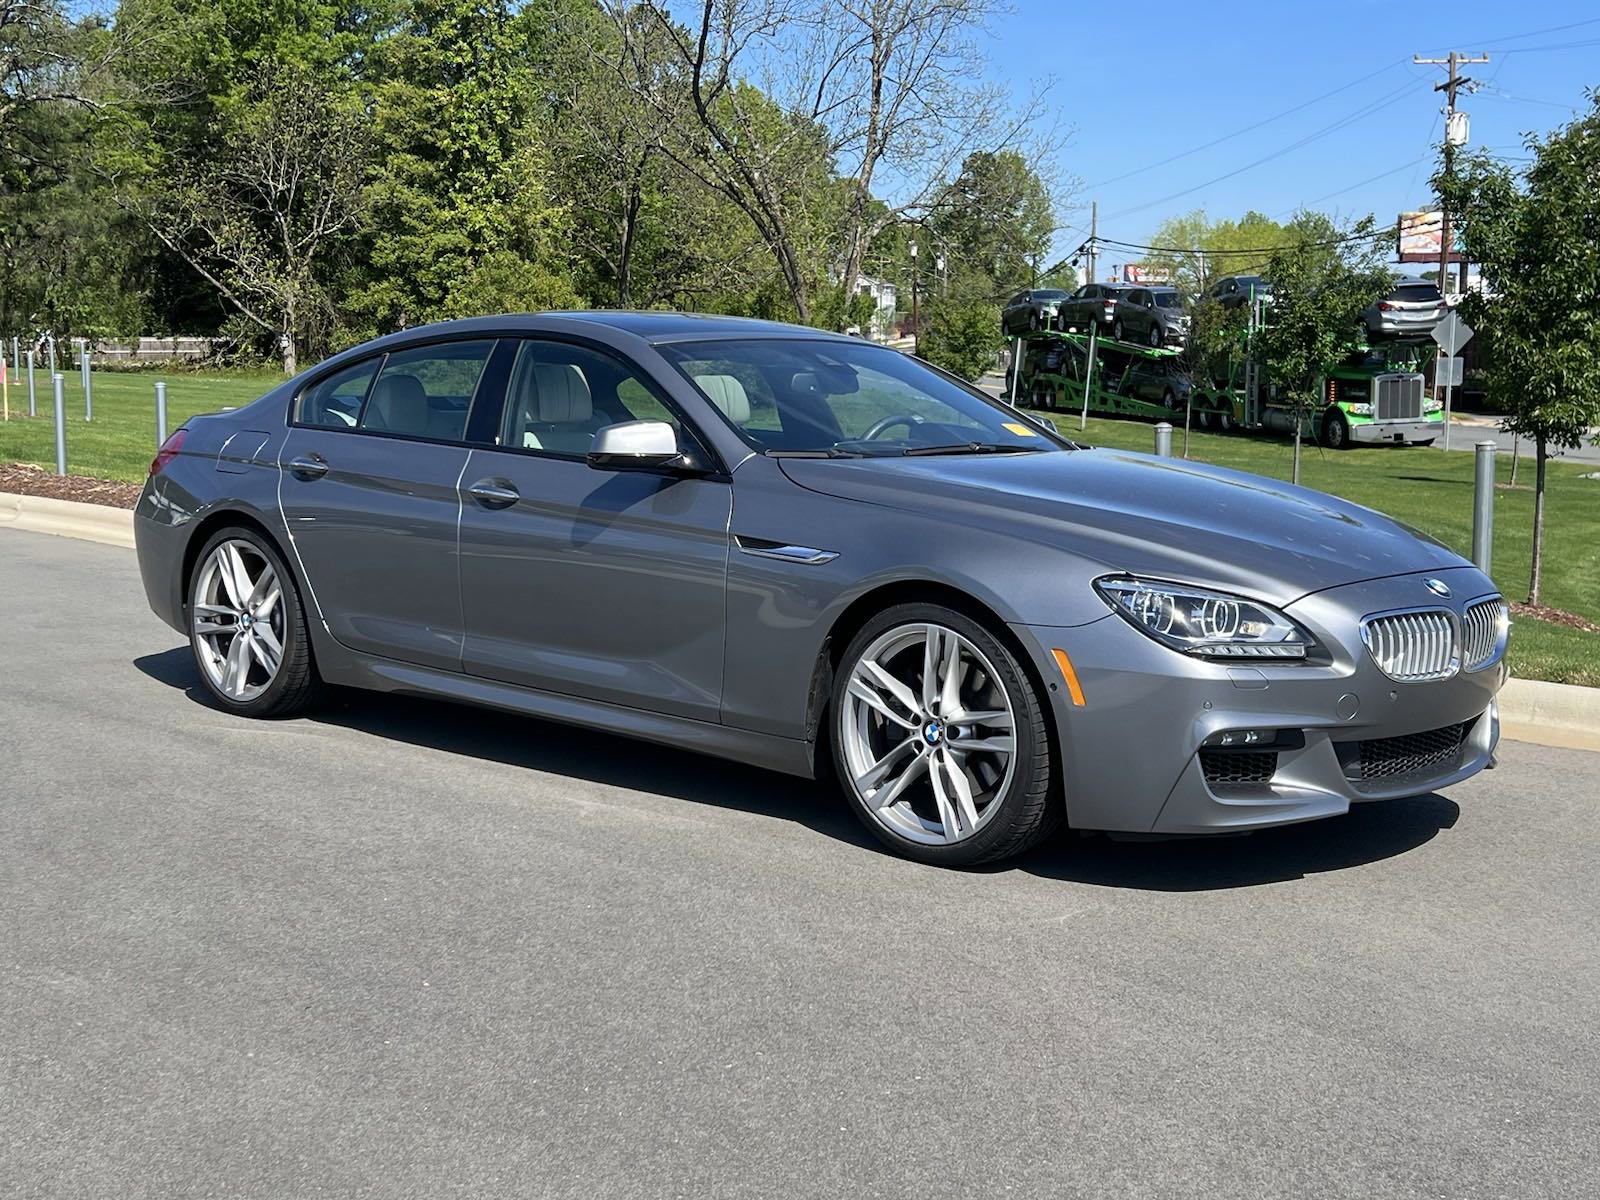 Used 2014 BMW 6 Series Cars for Sale Right Now - Autotrader